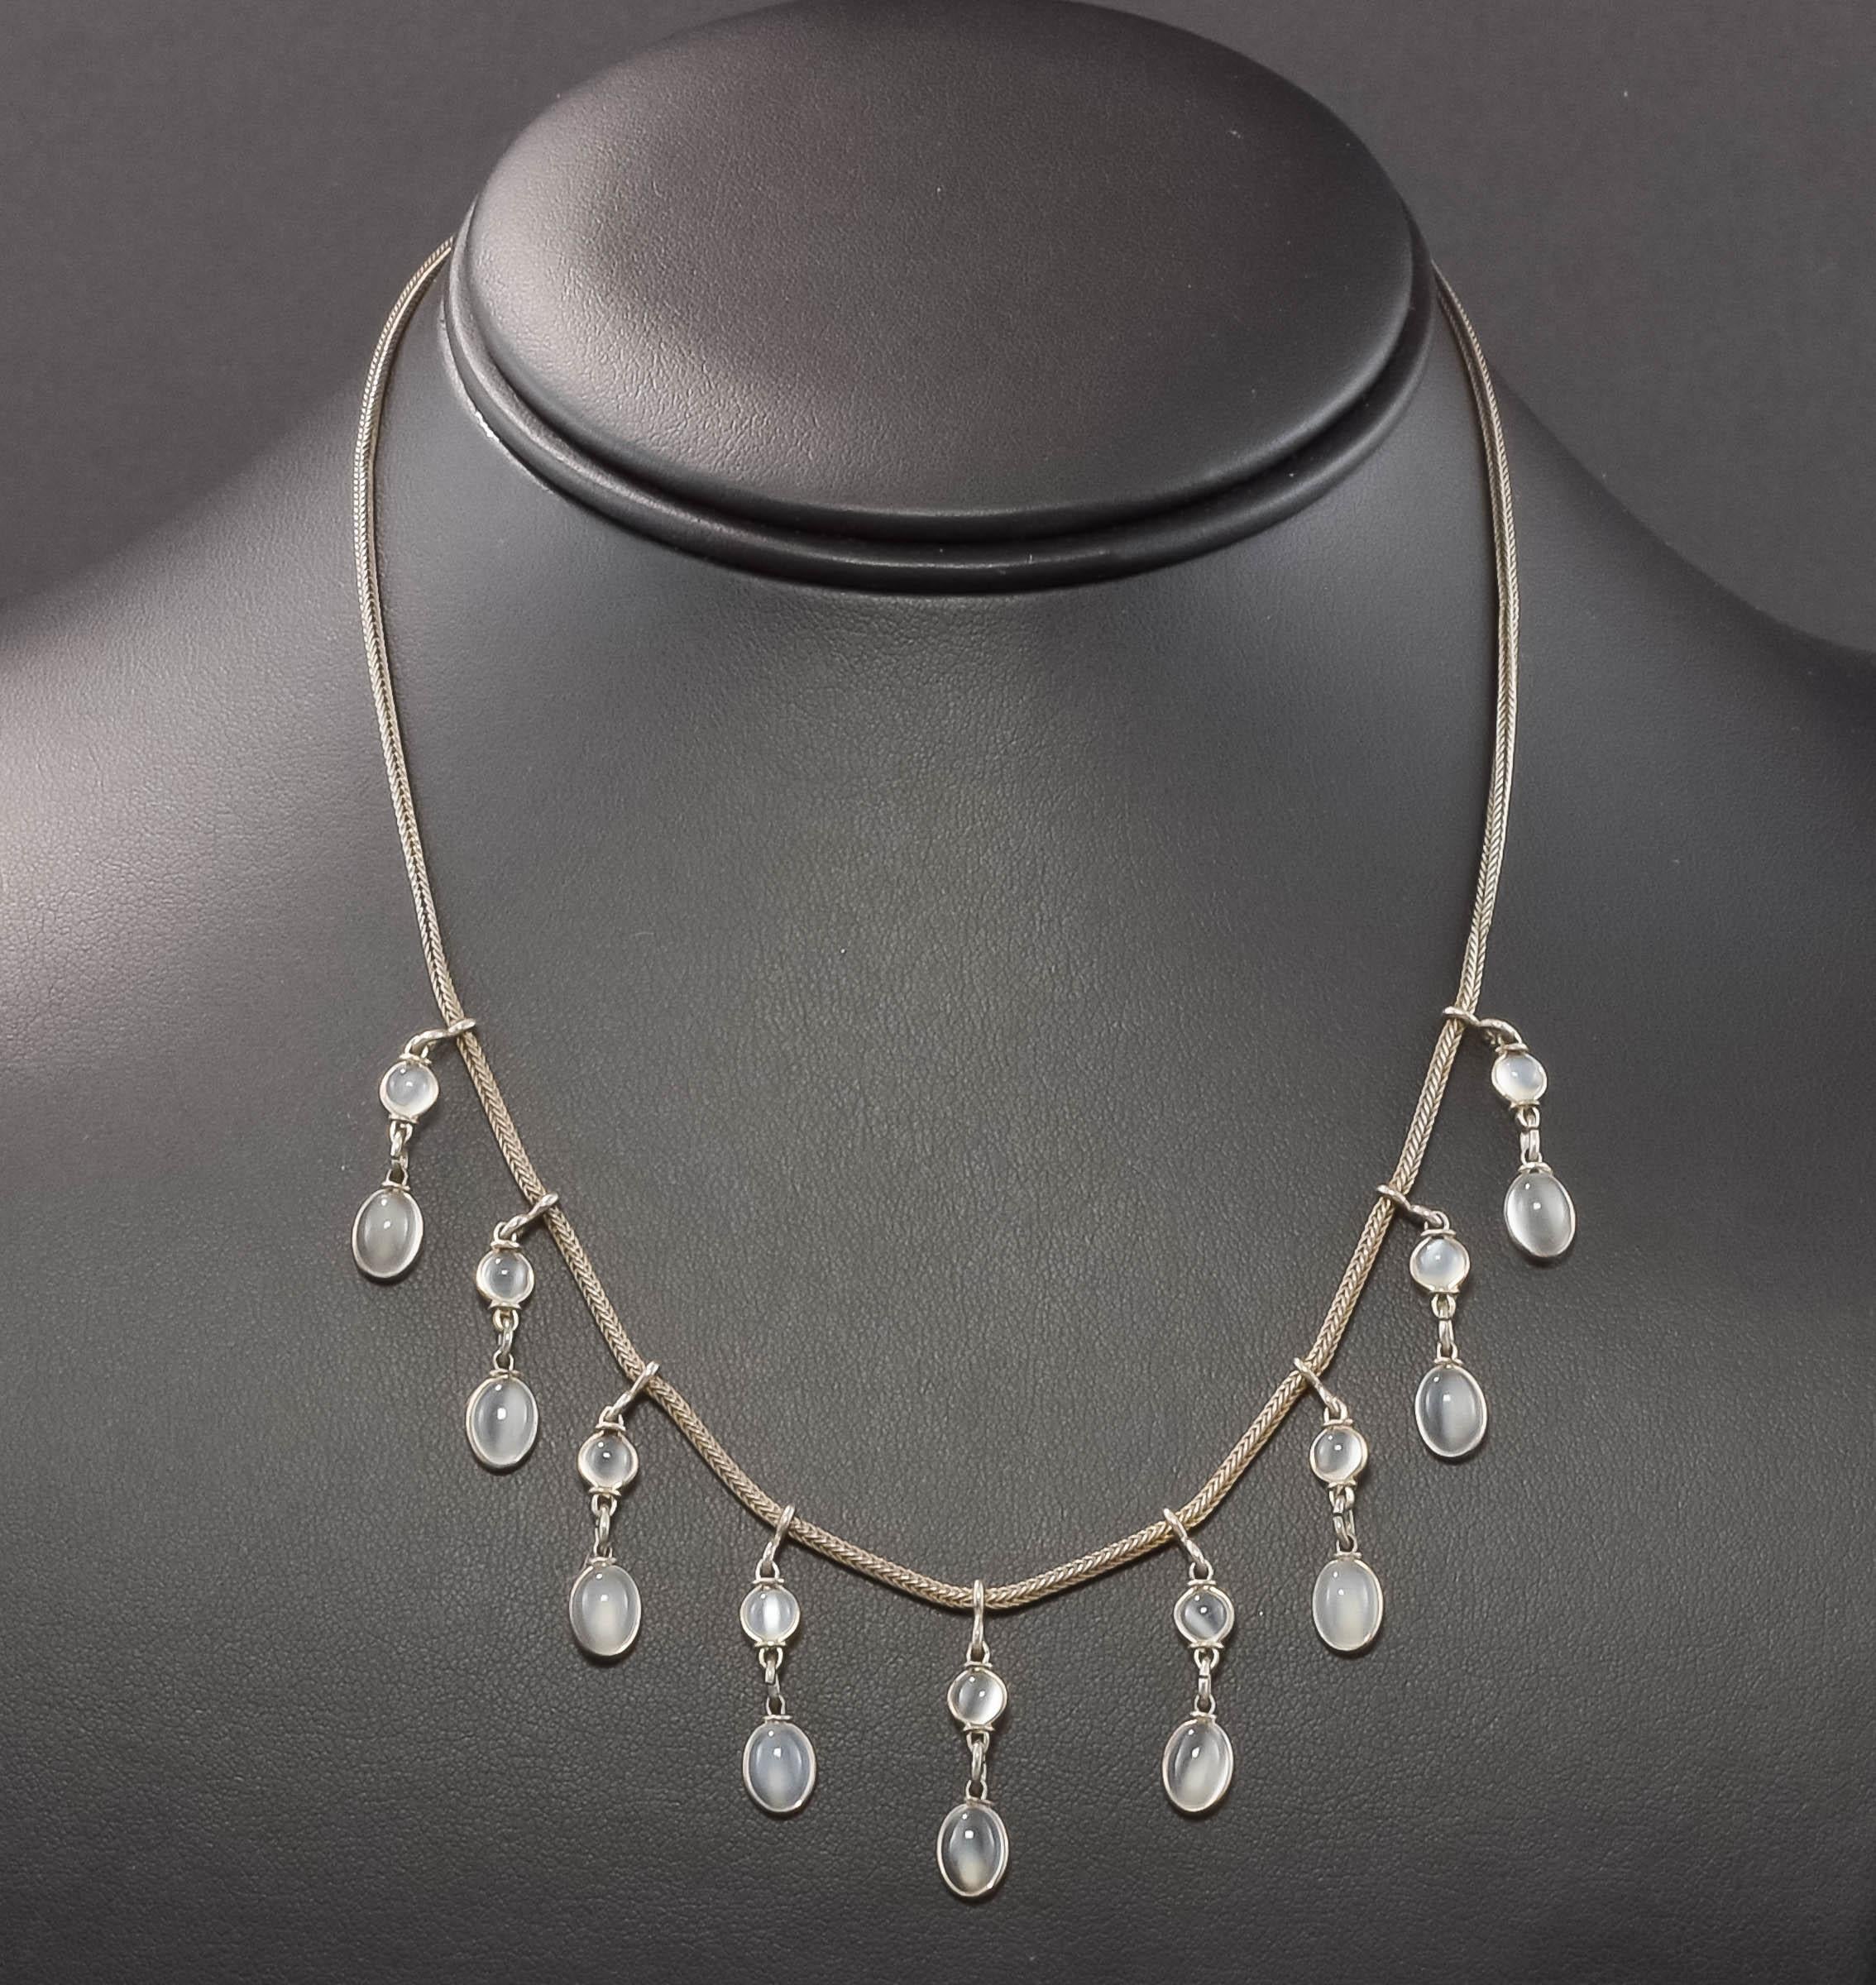 Dating to the Arts & Crafts period (1890 - 1910), this dainty and ethereal antique Moonstone Droplet Necklace was found in a New England Estate.

Crafted of silver testing around sterling standard, the necklace features a total of 18 petite silvery